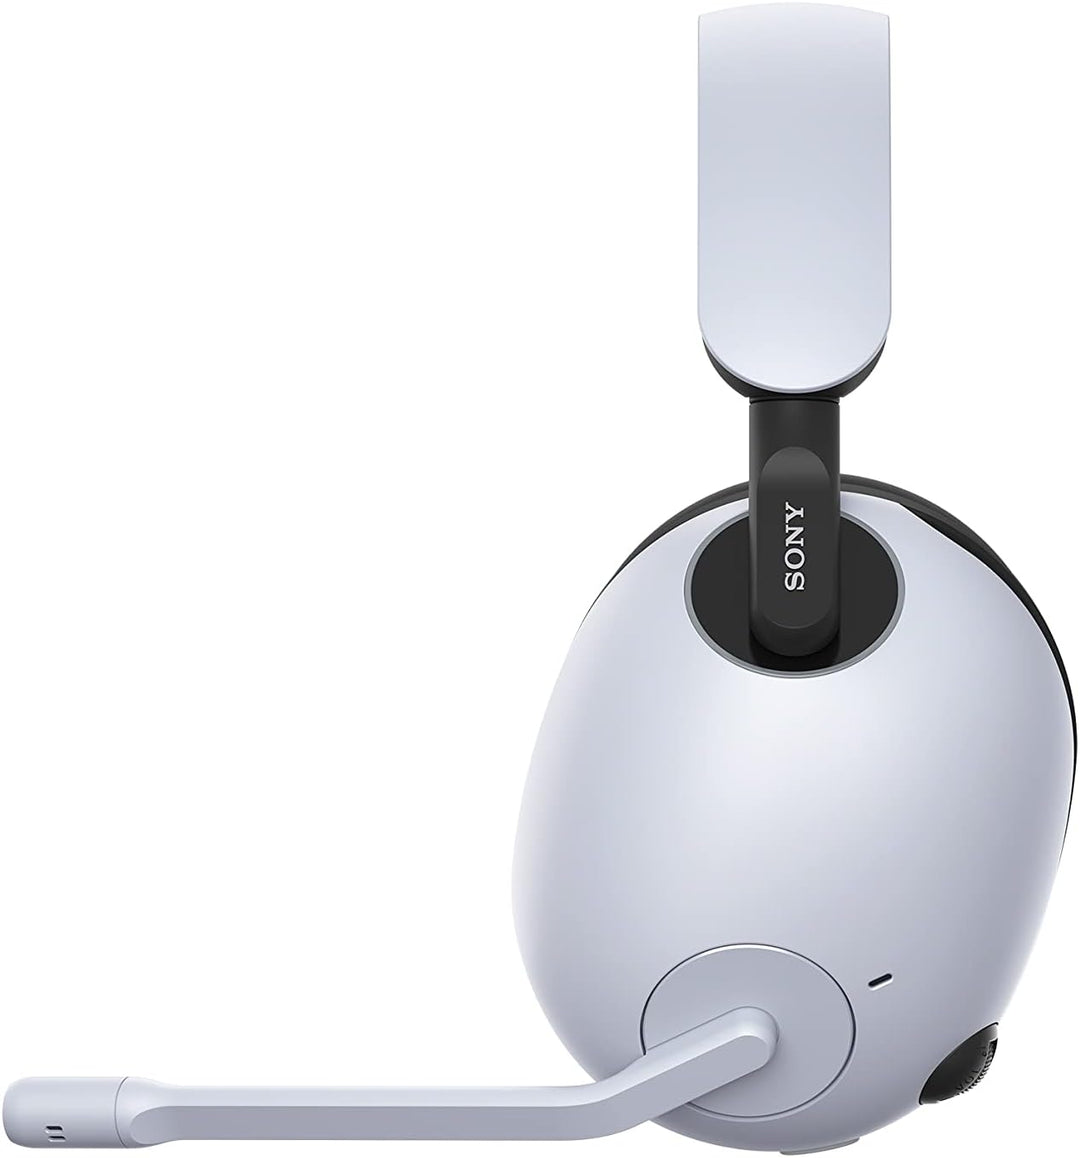 Sony | INZONE H9 Wireless Over-Ear Gaming Headset with 7.1 Surround Sound For PC, PS5 & Mobile - White | WHG900N/W.WHITE